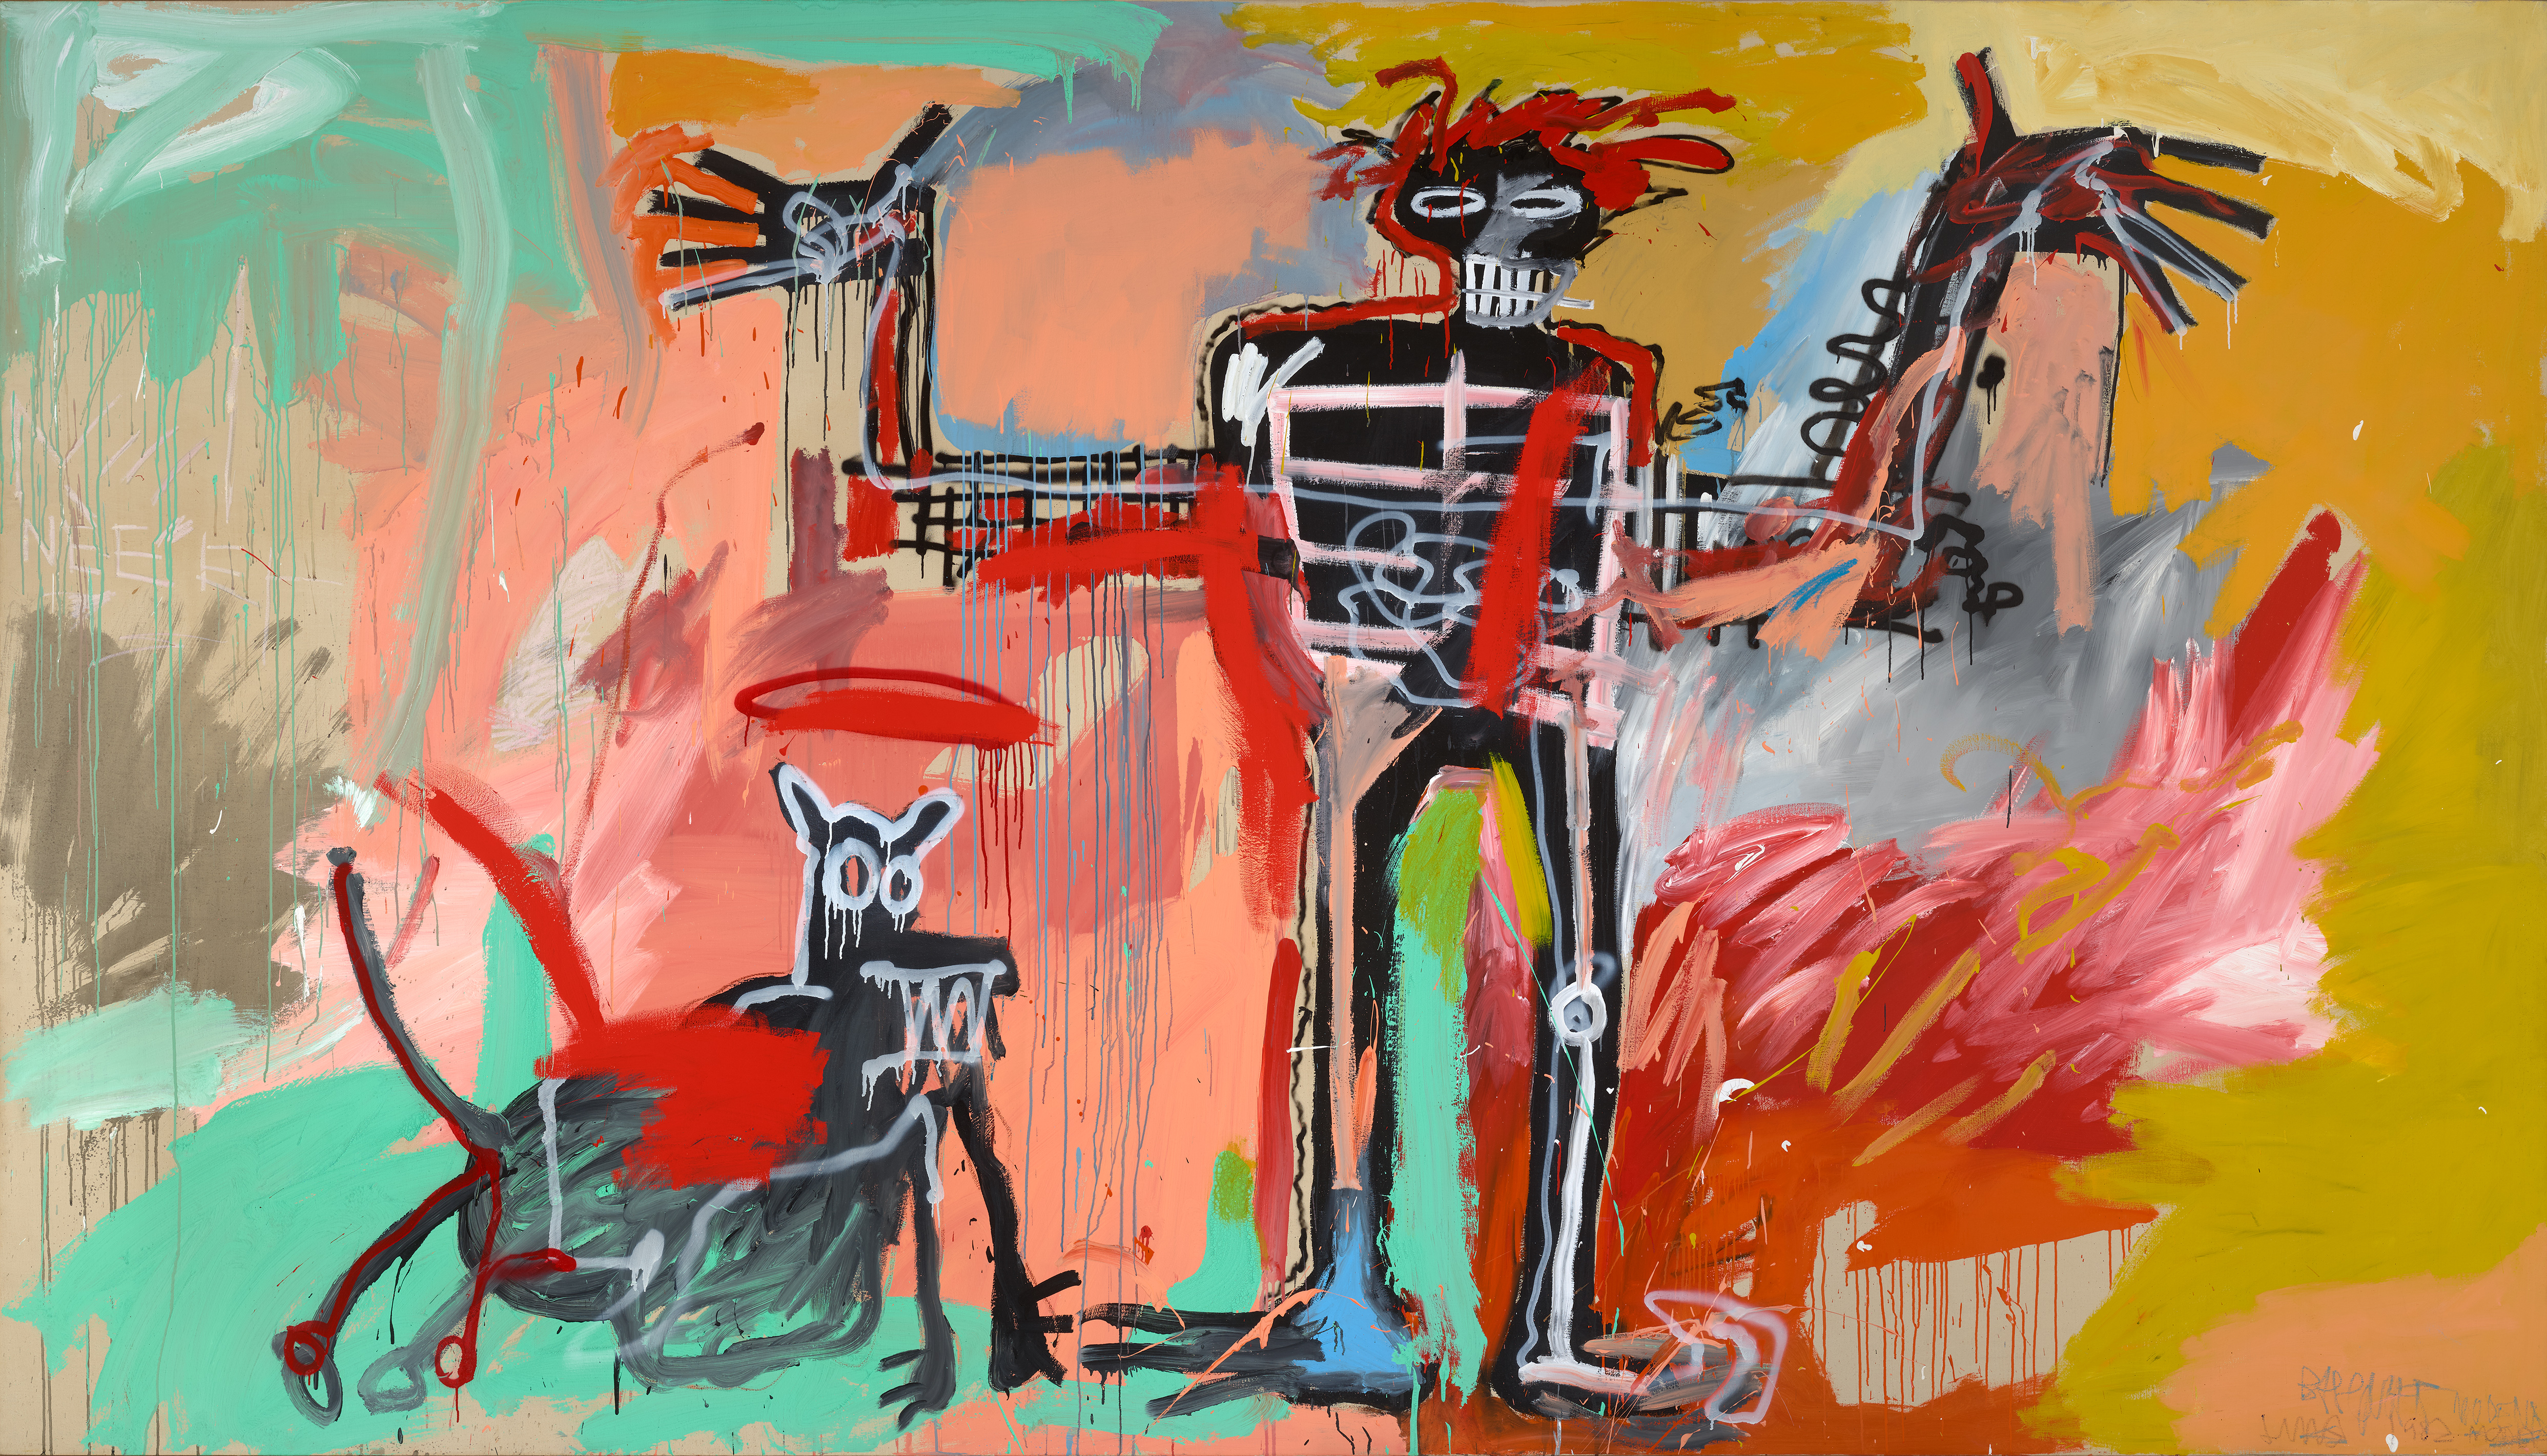 JEAN-MICHEL BASQUIAT, BOY AND DOG IN A JOHNNYPUMP, 1982 Acrylic, oil stick, and spray paint on canvas; 240 x 420.4 cm Private Collection © Estate of Jean-Michel Basquiat. Licensed by Artestar, New York Photo: Daniel Portnoy